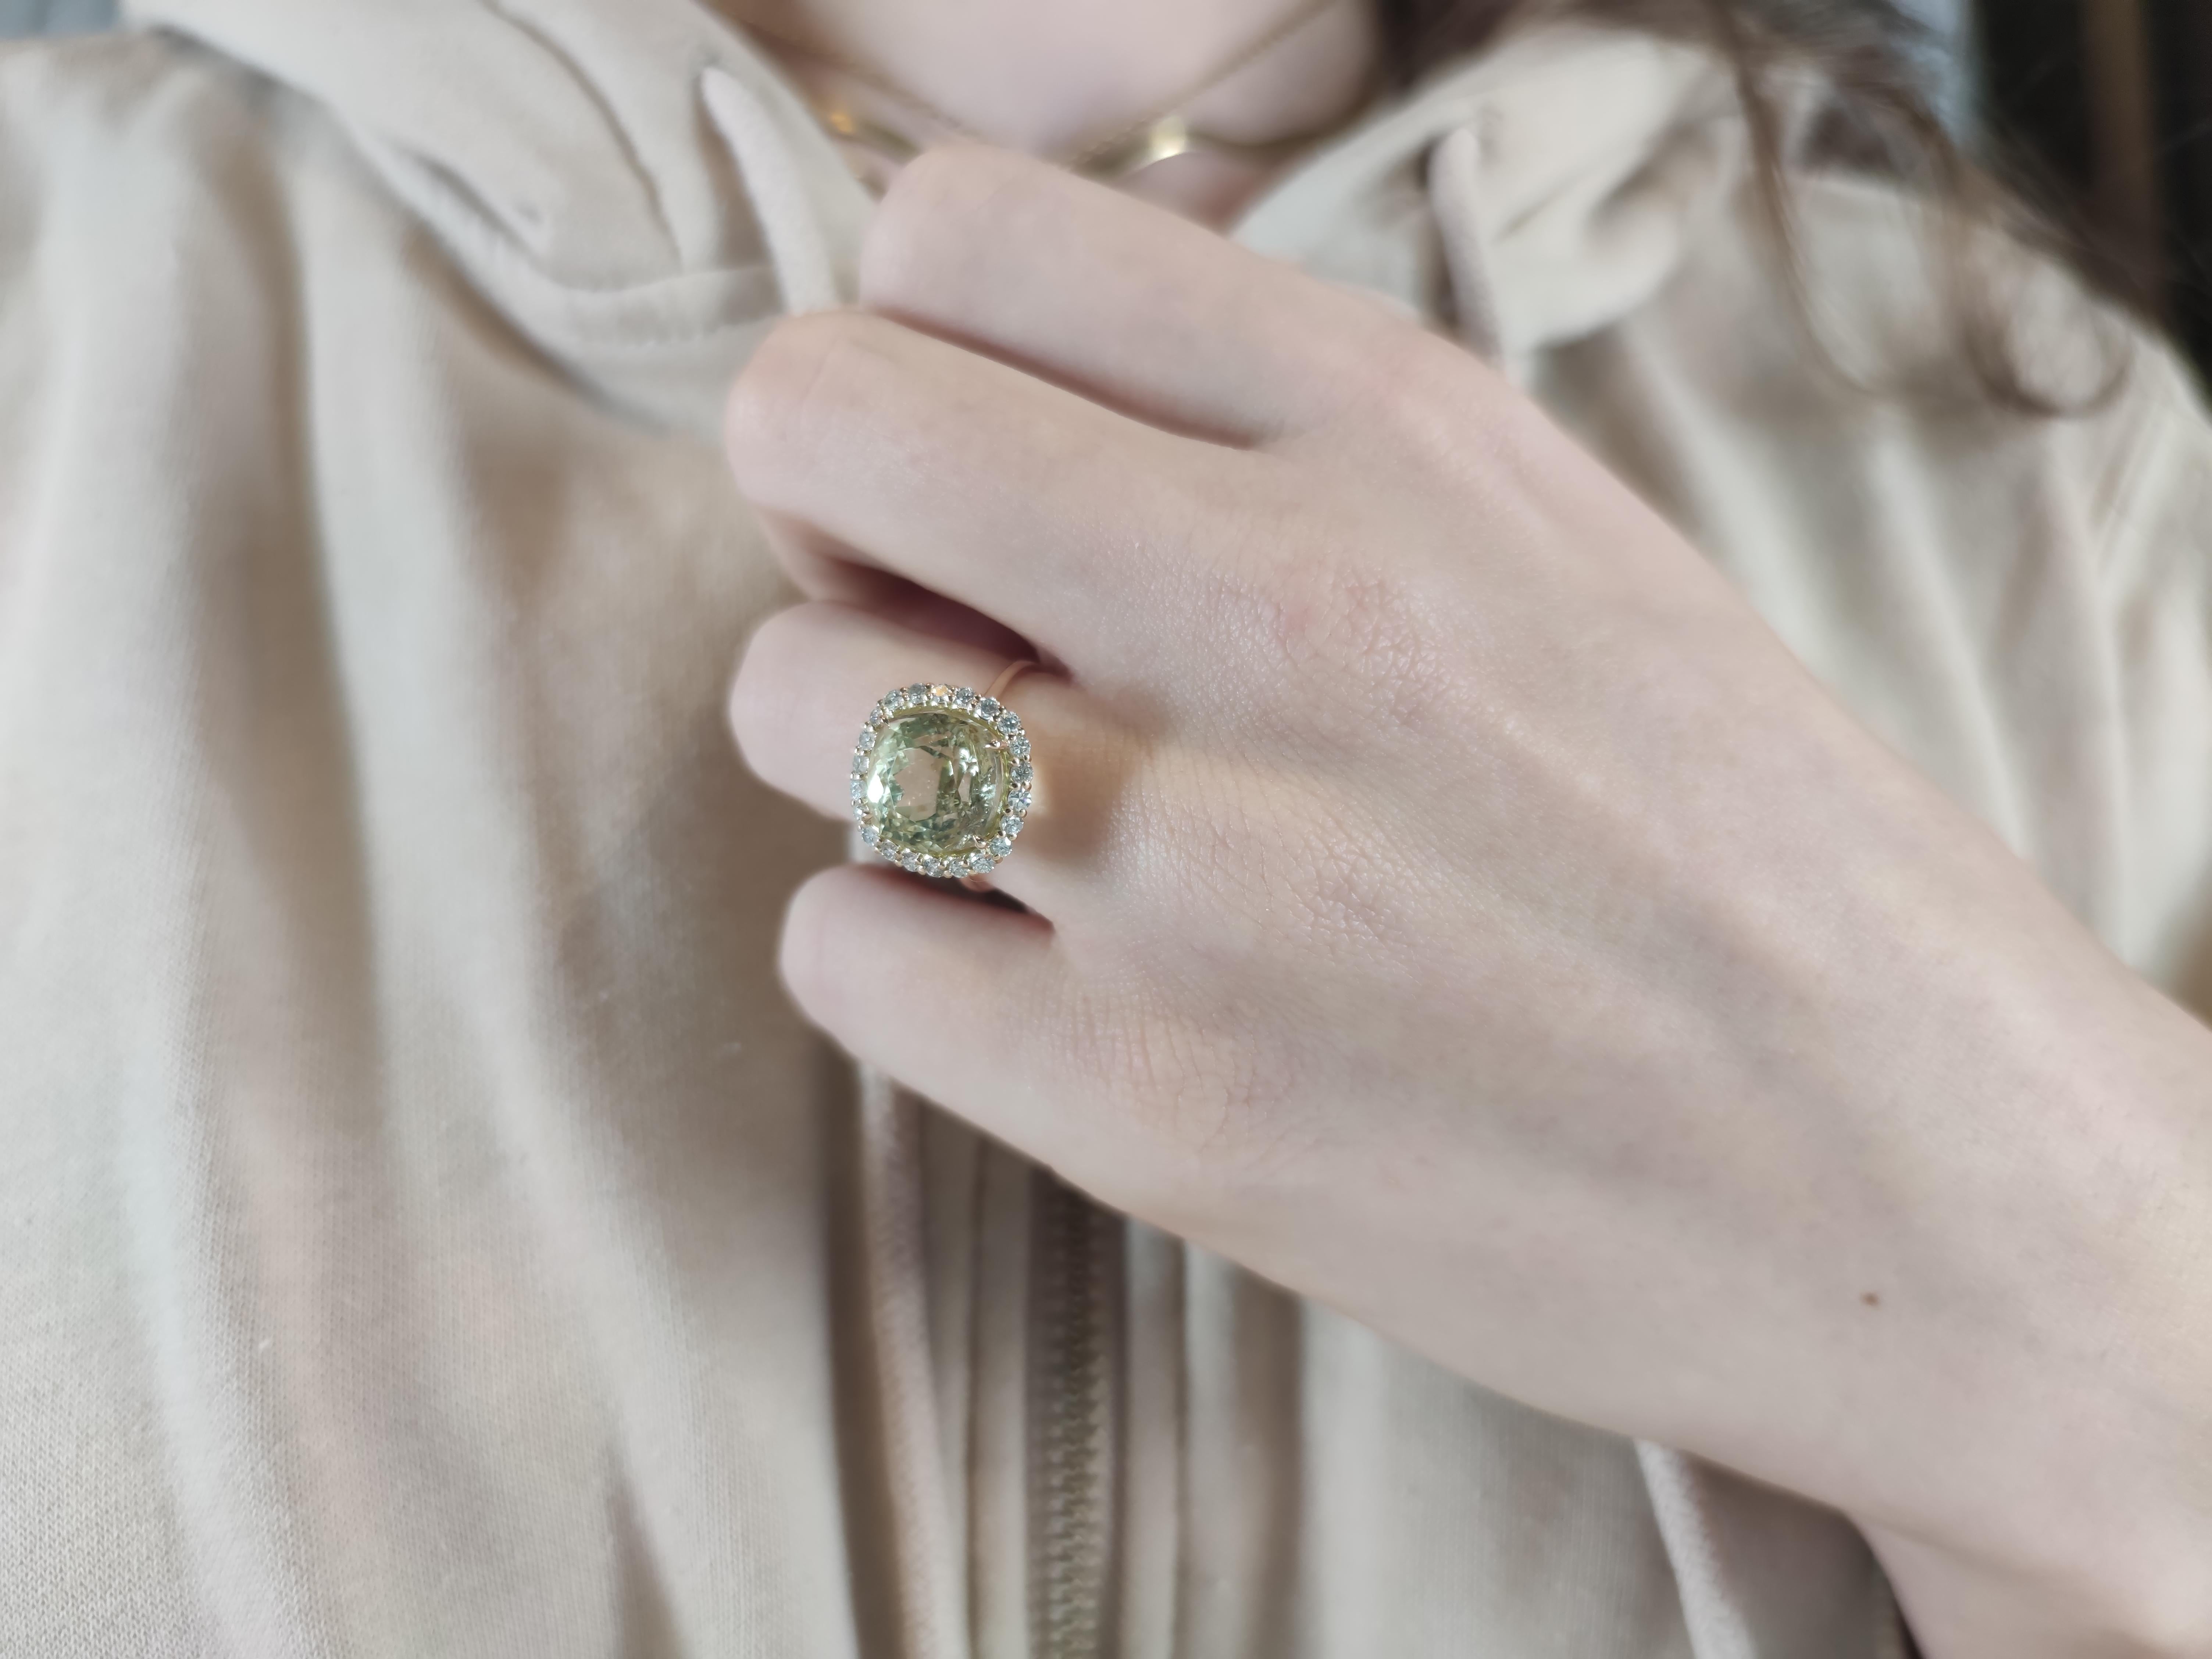 Elevate your style with our Handmade Solid 14K Gold Ring featuring a stunning Yellow Tourmaline and 22 Diamonds. Certified gemstones for the discerning buyer. Exclusive jewelry.

SIZE:
To look at the photos with the scale ruler
-American Size: